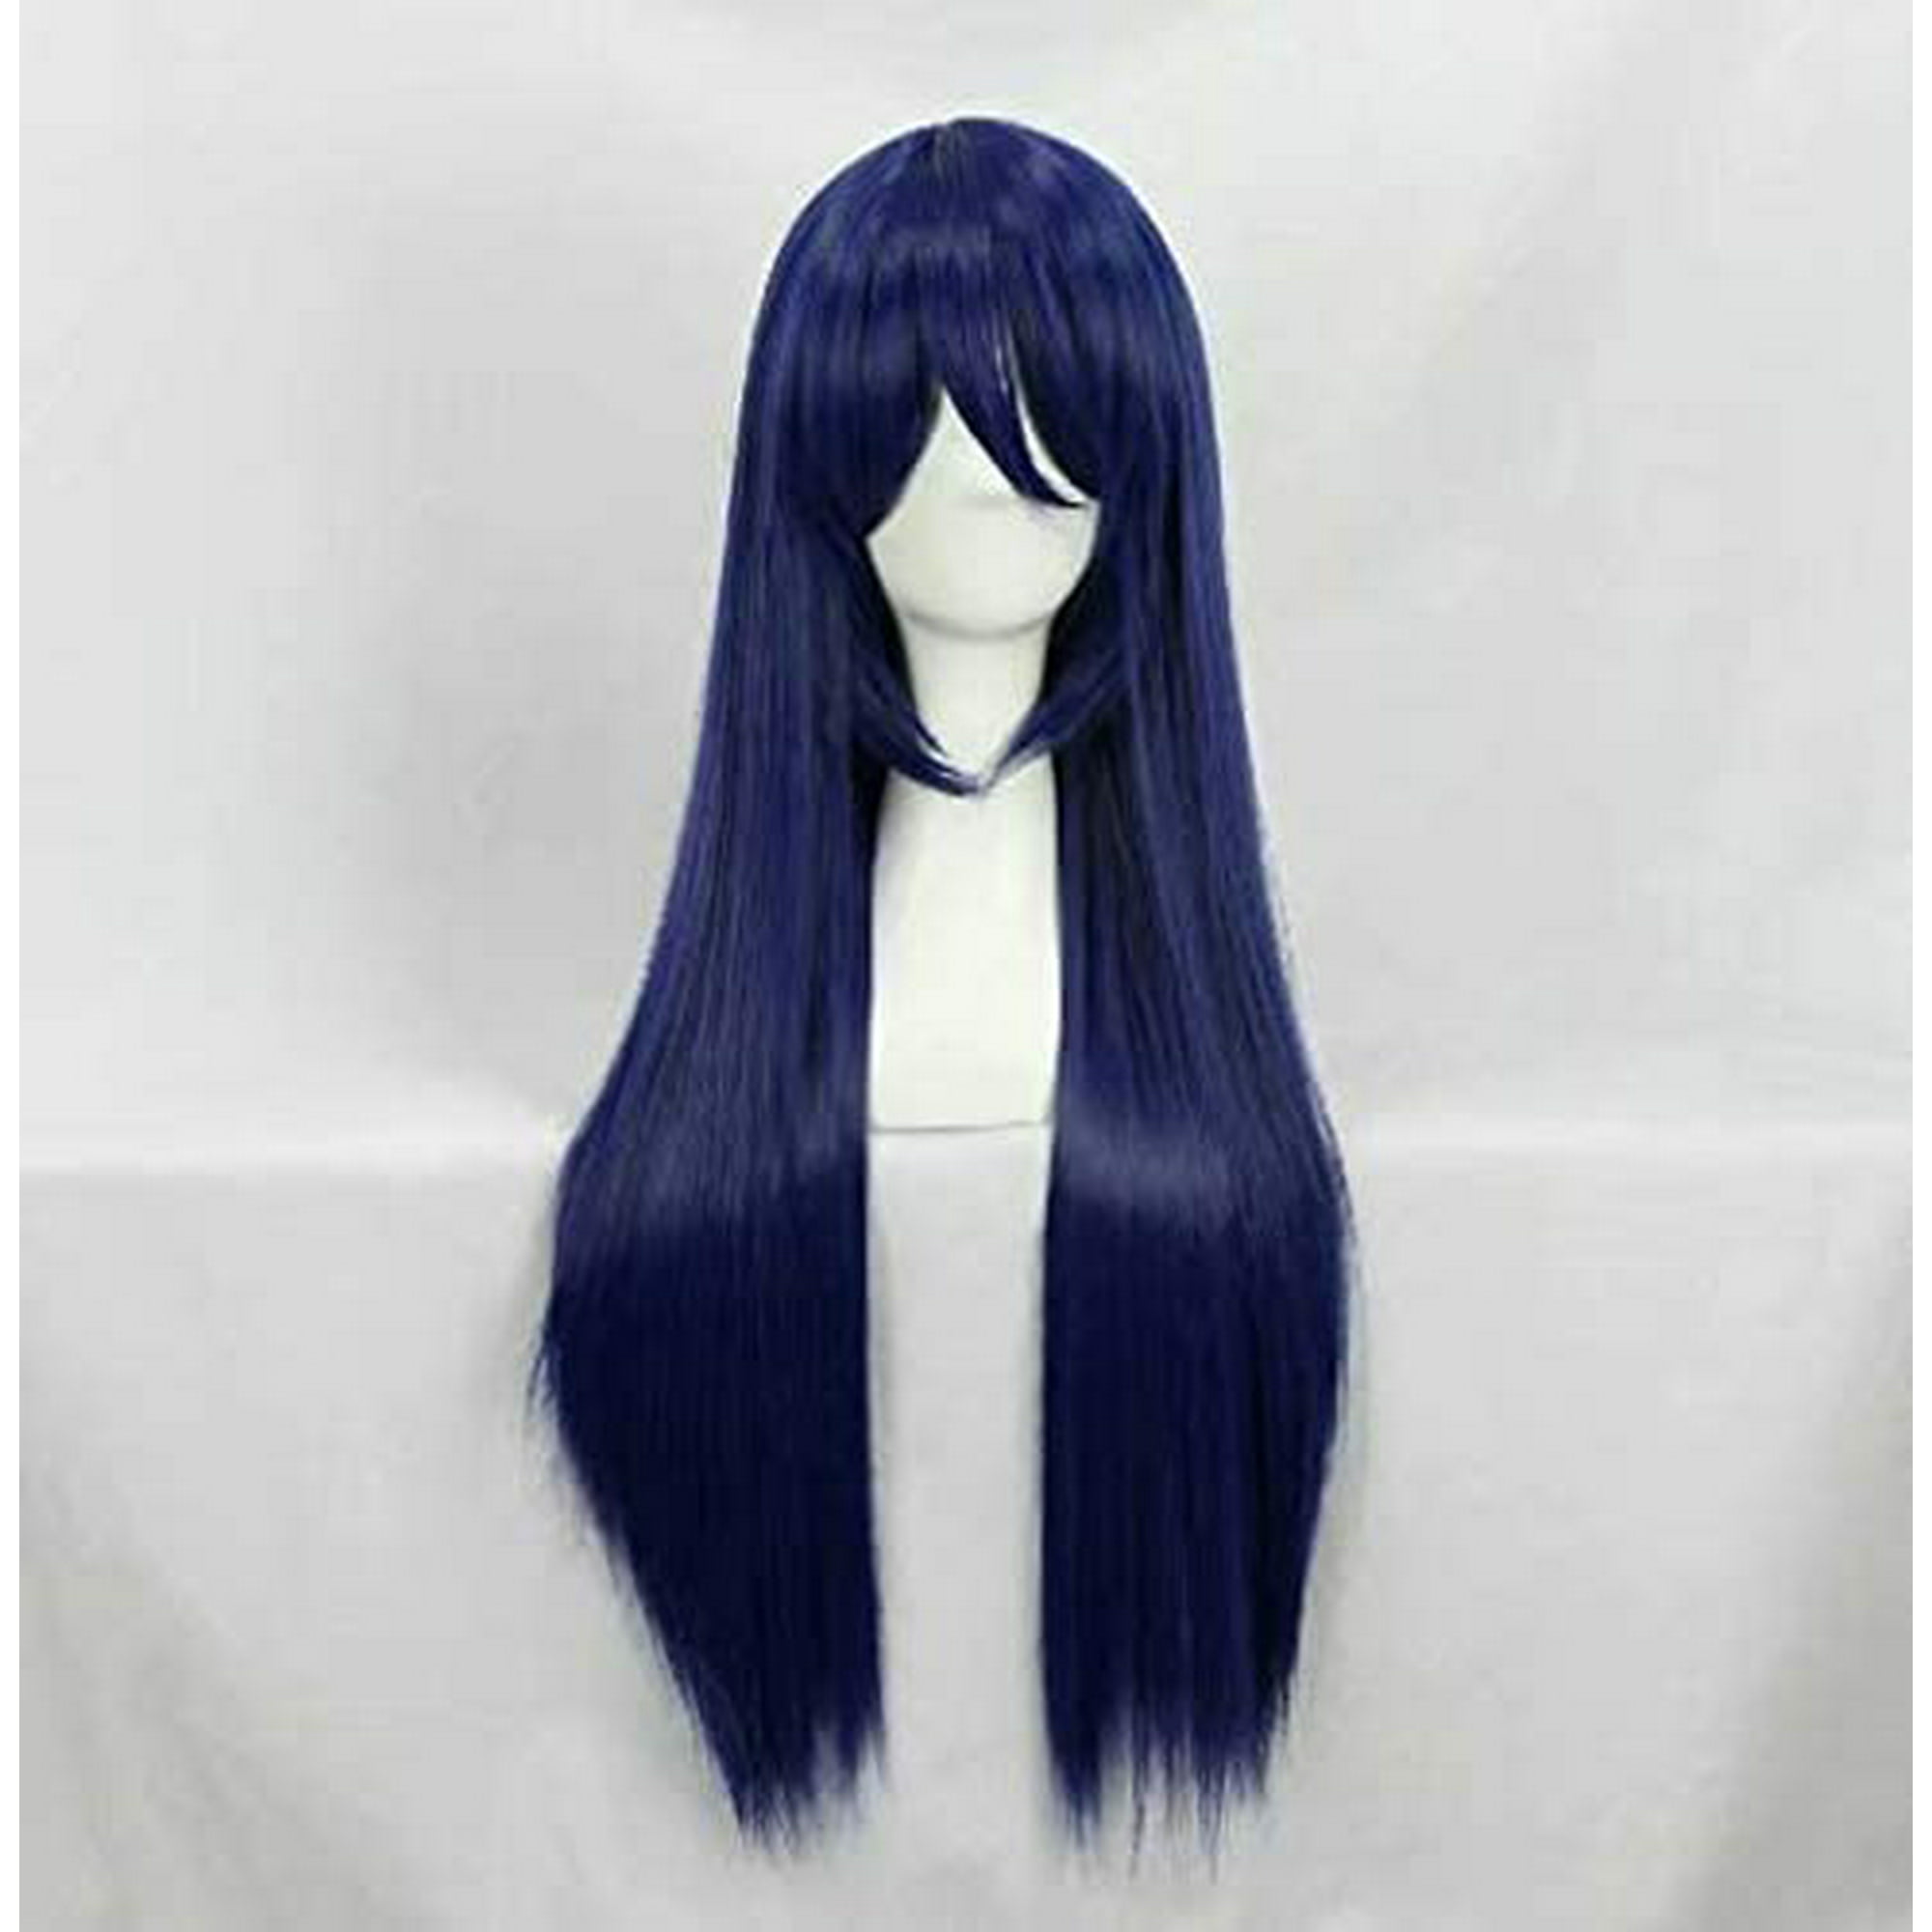 Sonoda Umi Cosplay Wig Japanese Anime Love Live Cos Long Blue Straight Wigs